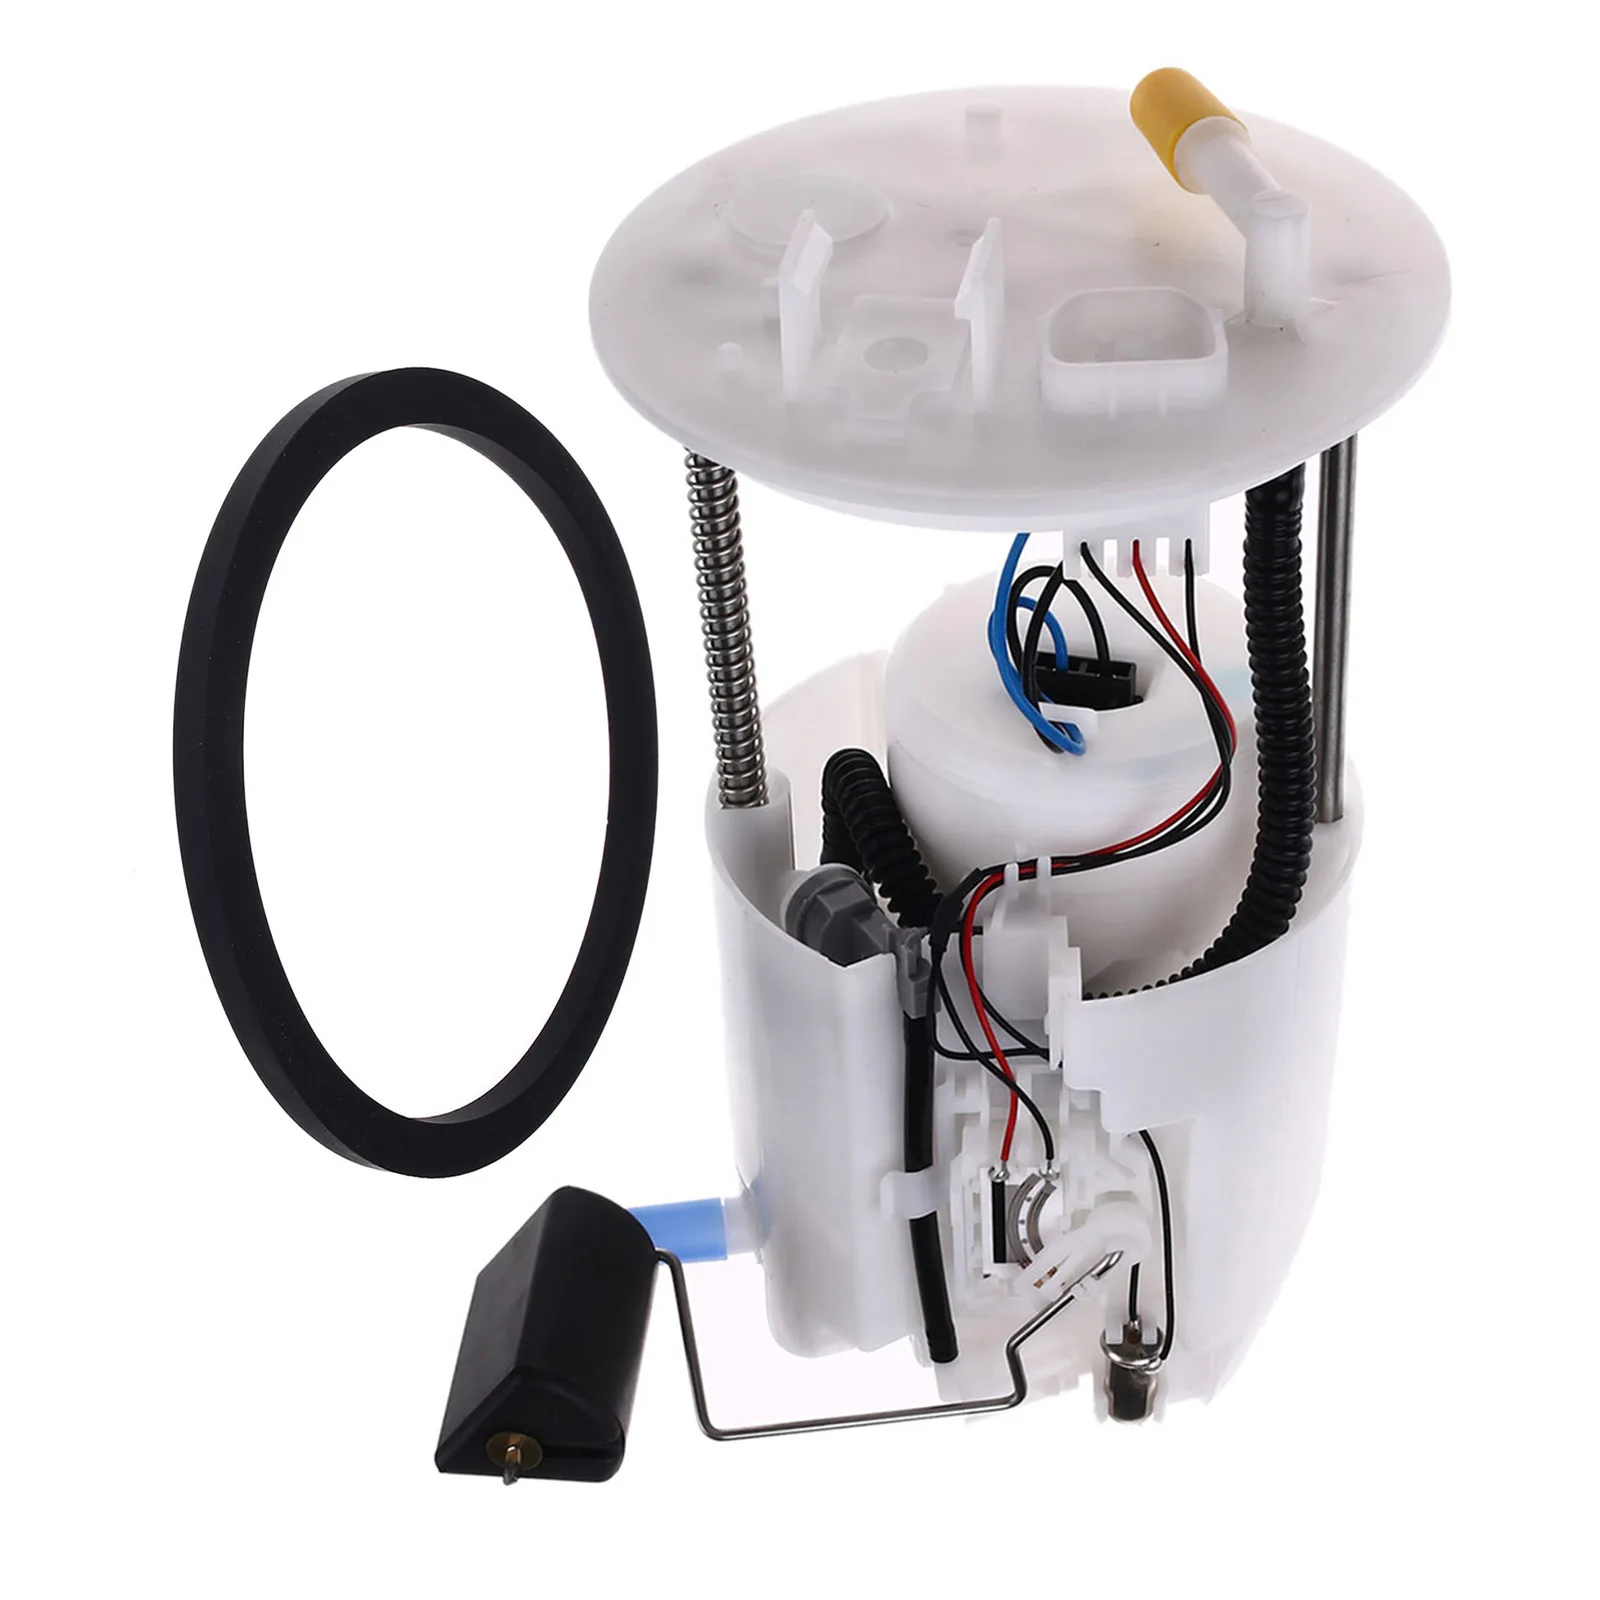 

In-stock CN US Fuel Pump Module Assembly for Mitsubishi Galant Eclipse 2006-2012 L4 2.4L FG1266 1760A153